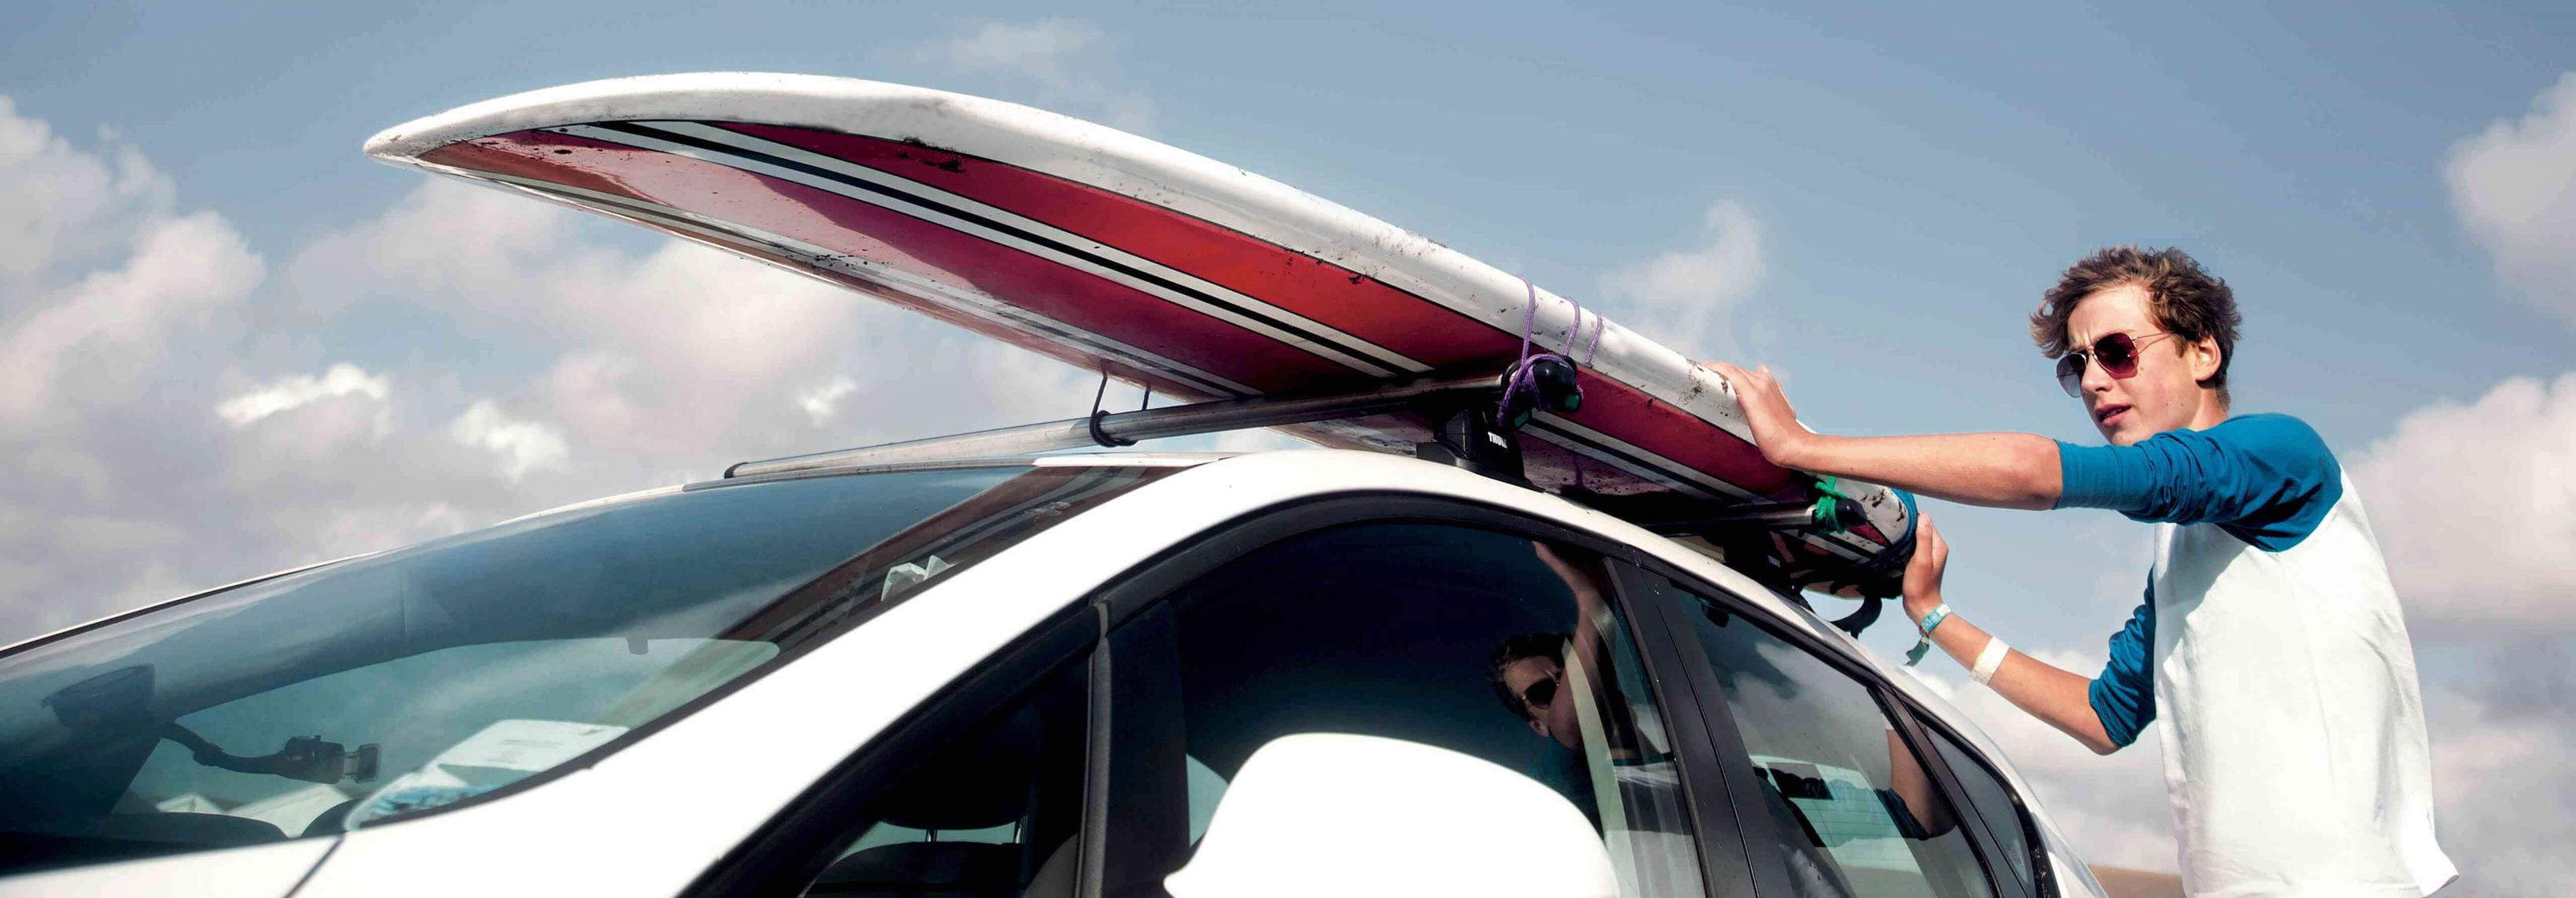 Surfboard attached to roof racks for summer holidays